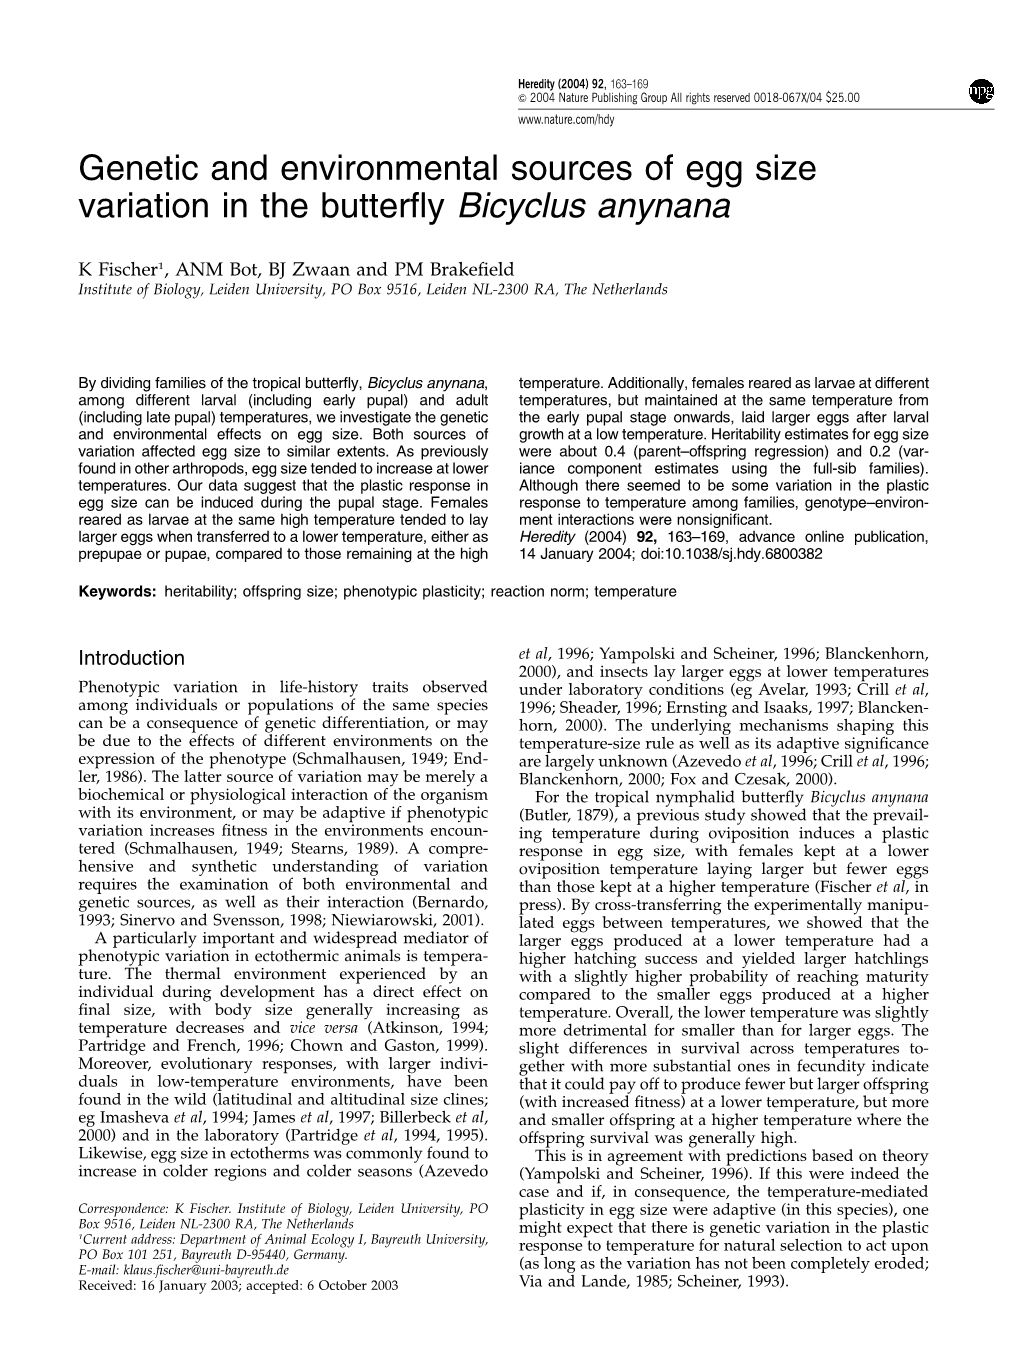 Genetic and Environmental Sources of Egg Size Variation in the Butterfly